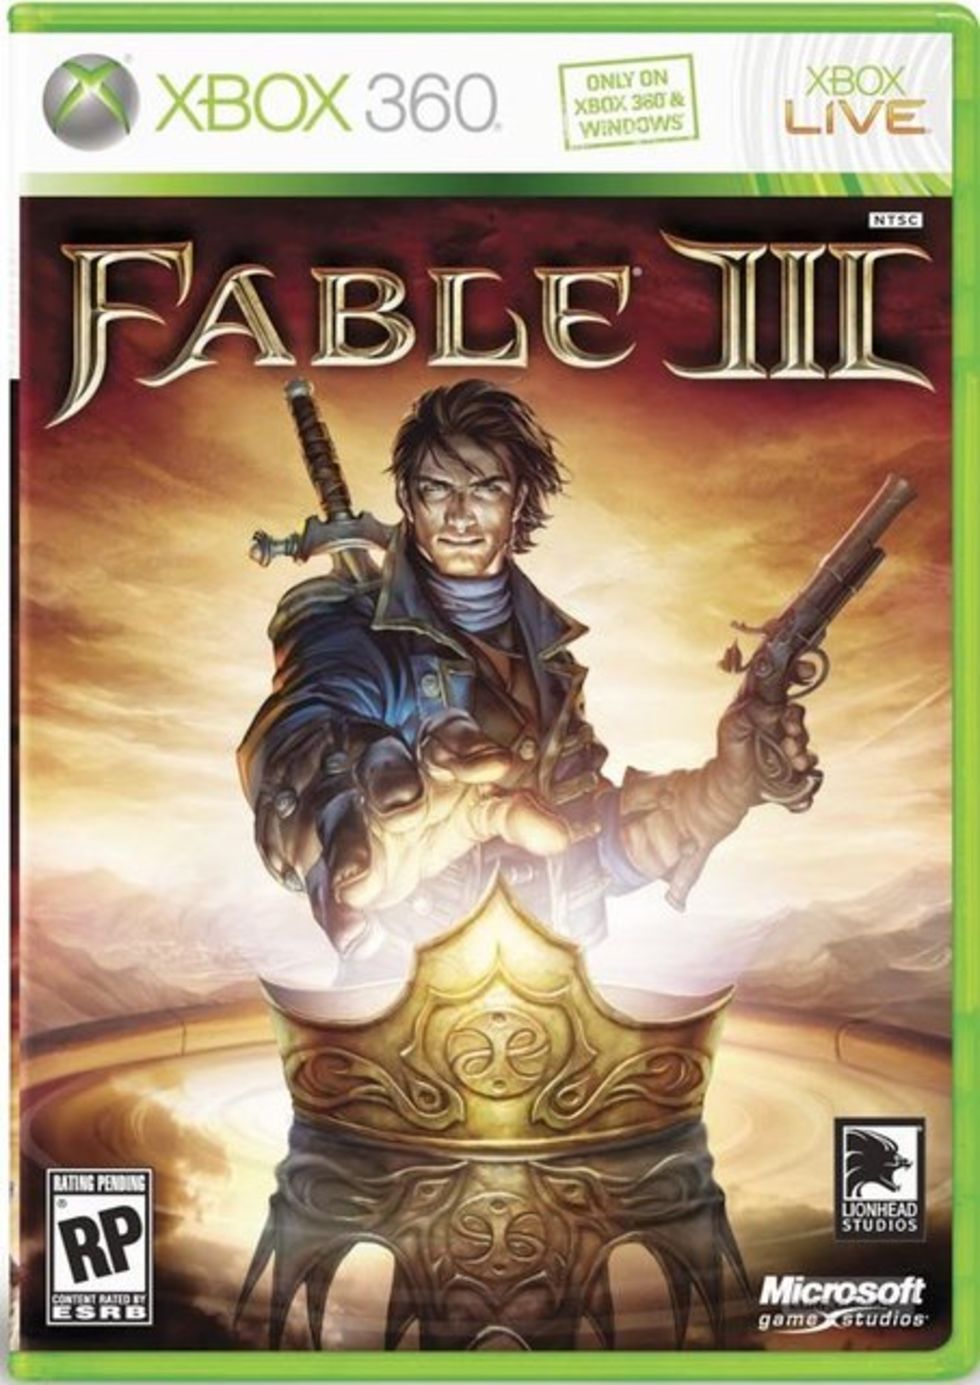 Fable III till PC?